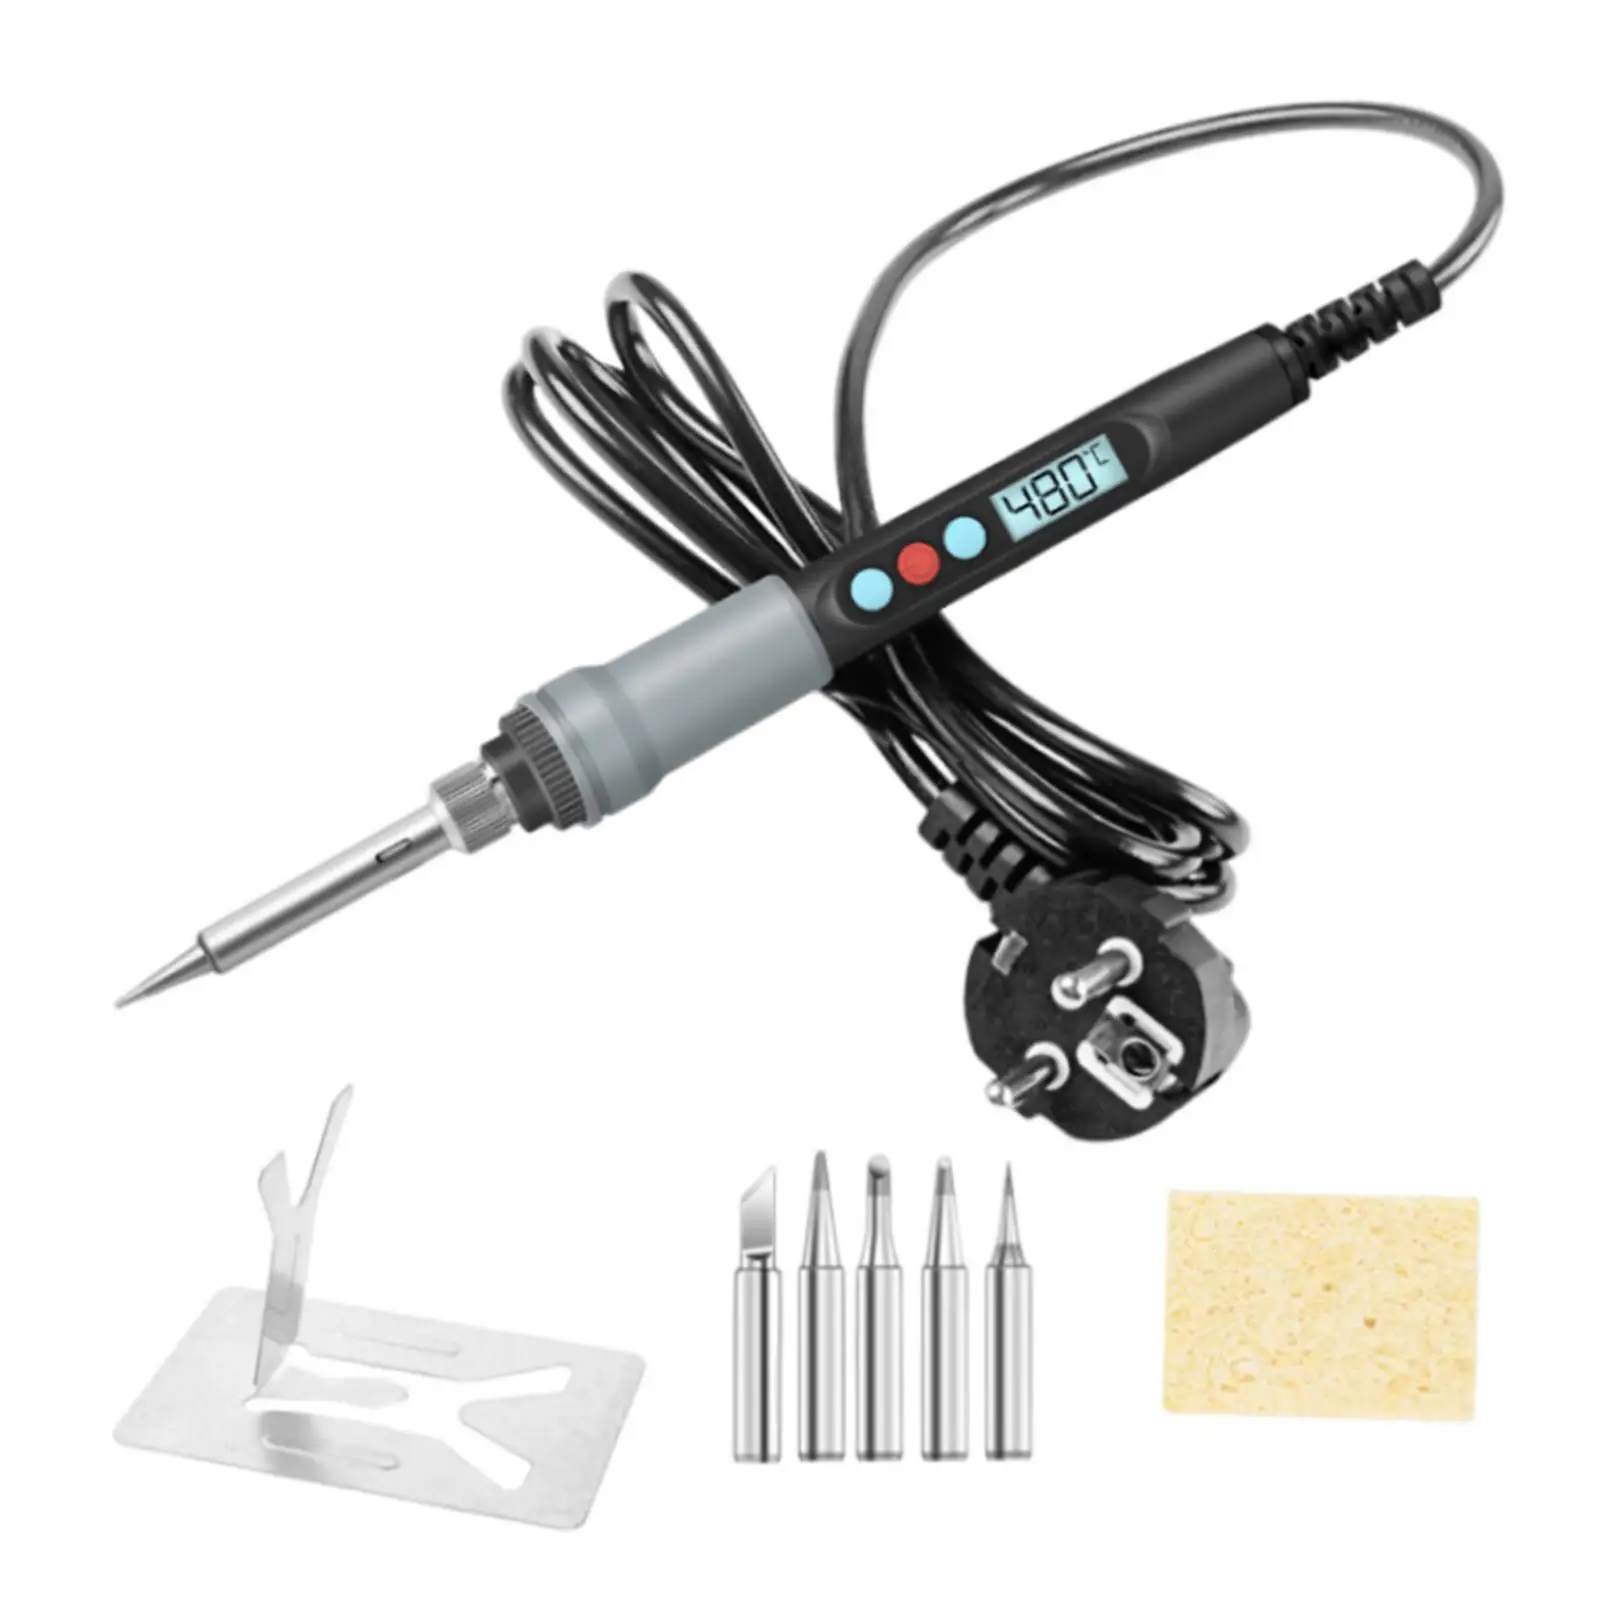 

Digital Soldering Station Precise Heat Control 90W Soldering Tool Set Solder Station for Home Appliance Circuit Boards Hobby